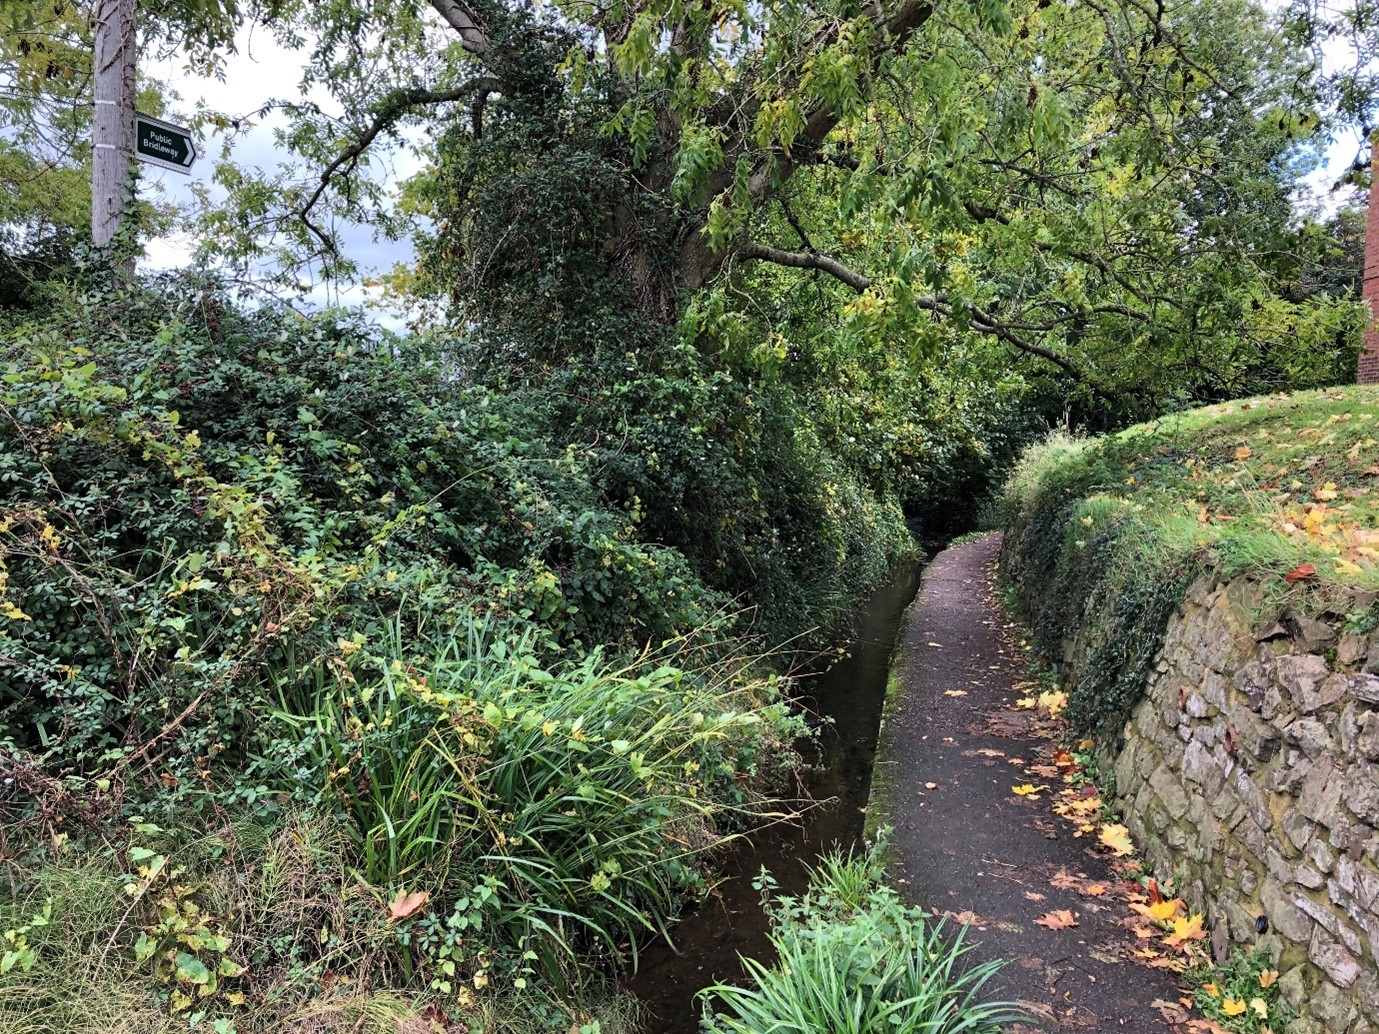 A concrete pathway running alongside the Culm at Cullompton